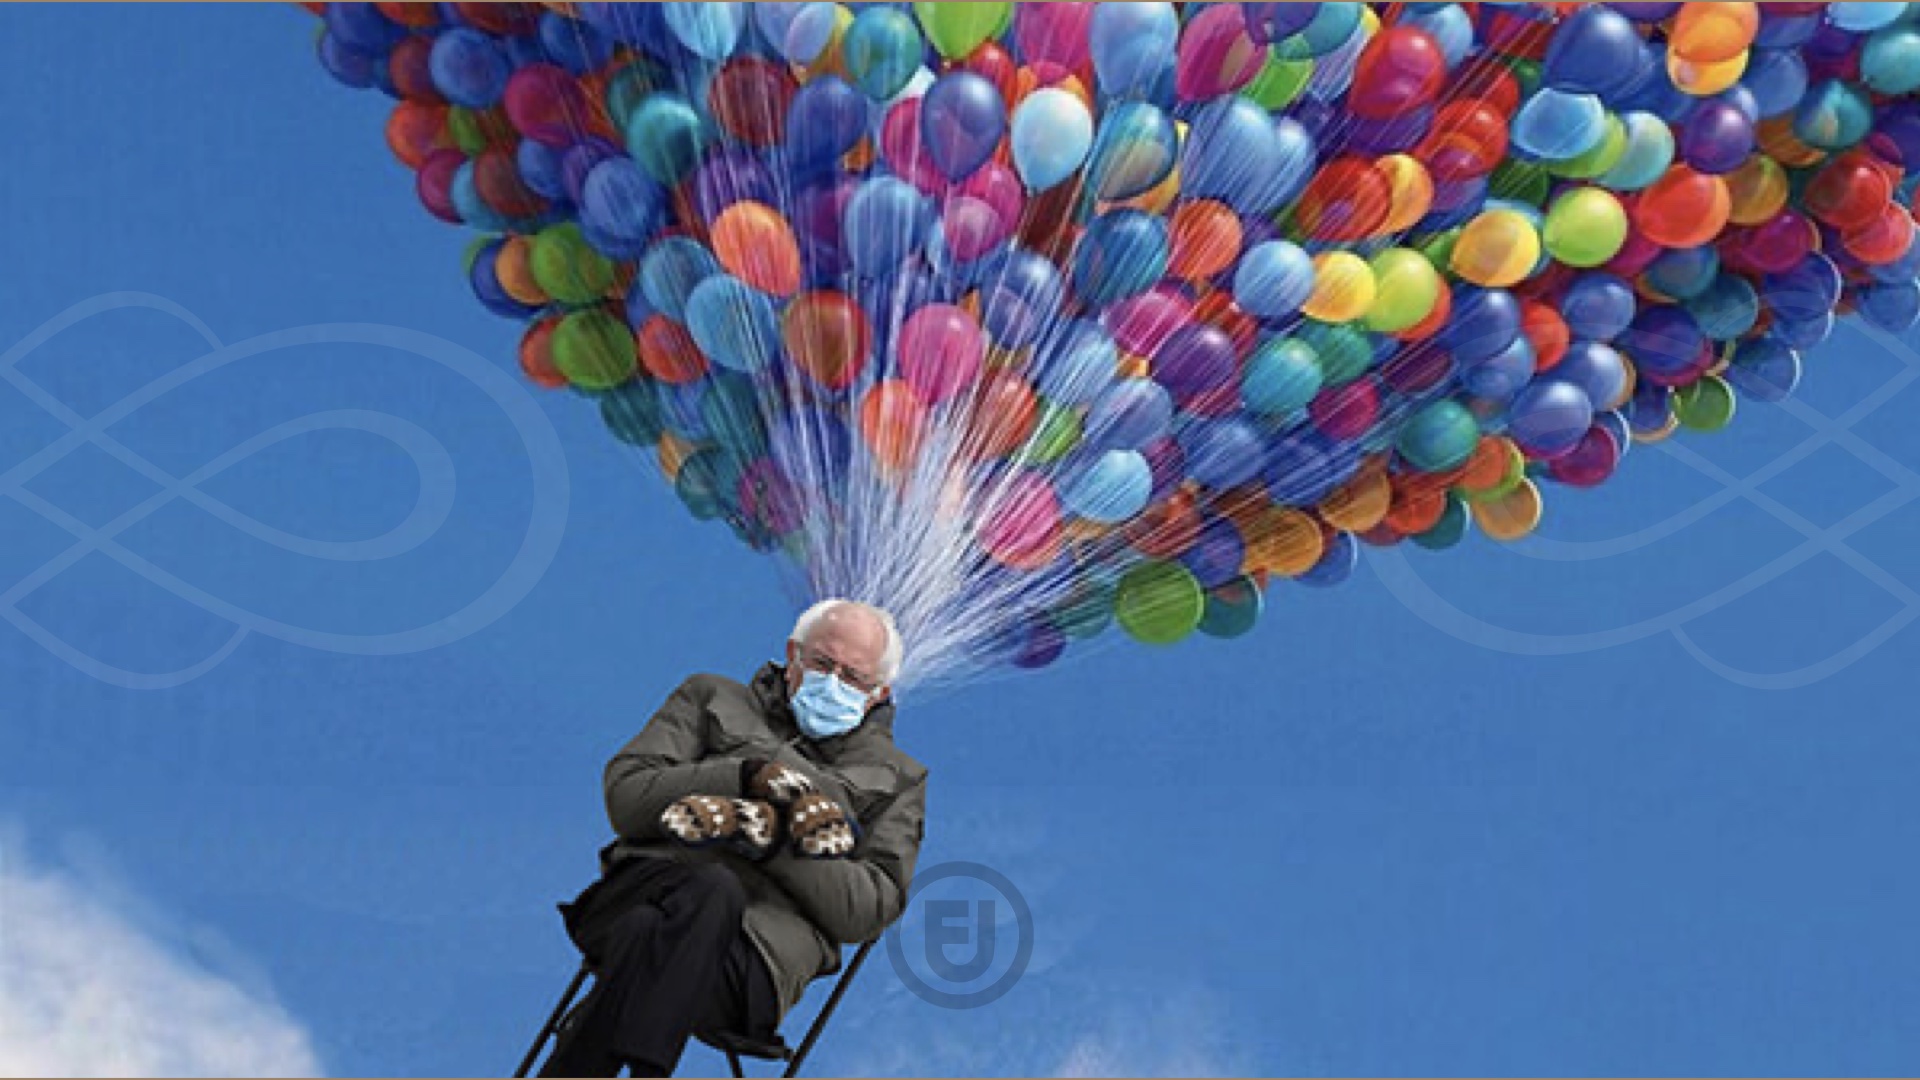 Colorful image of Bernie Sanders wearing his mittens sitting on a chair that is being lifted up by many balloons a la the movie UP. No text